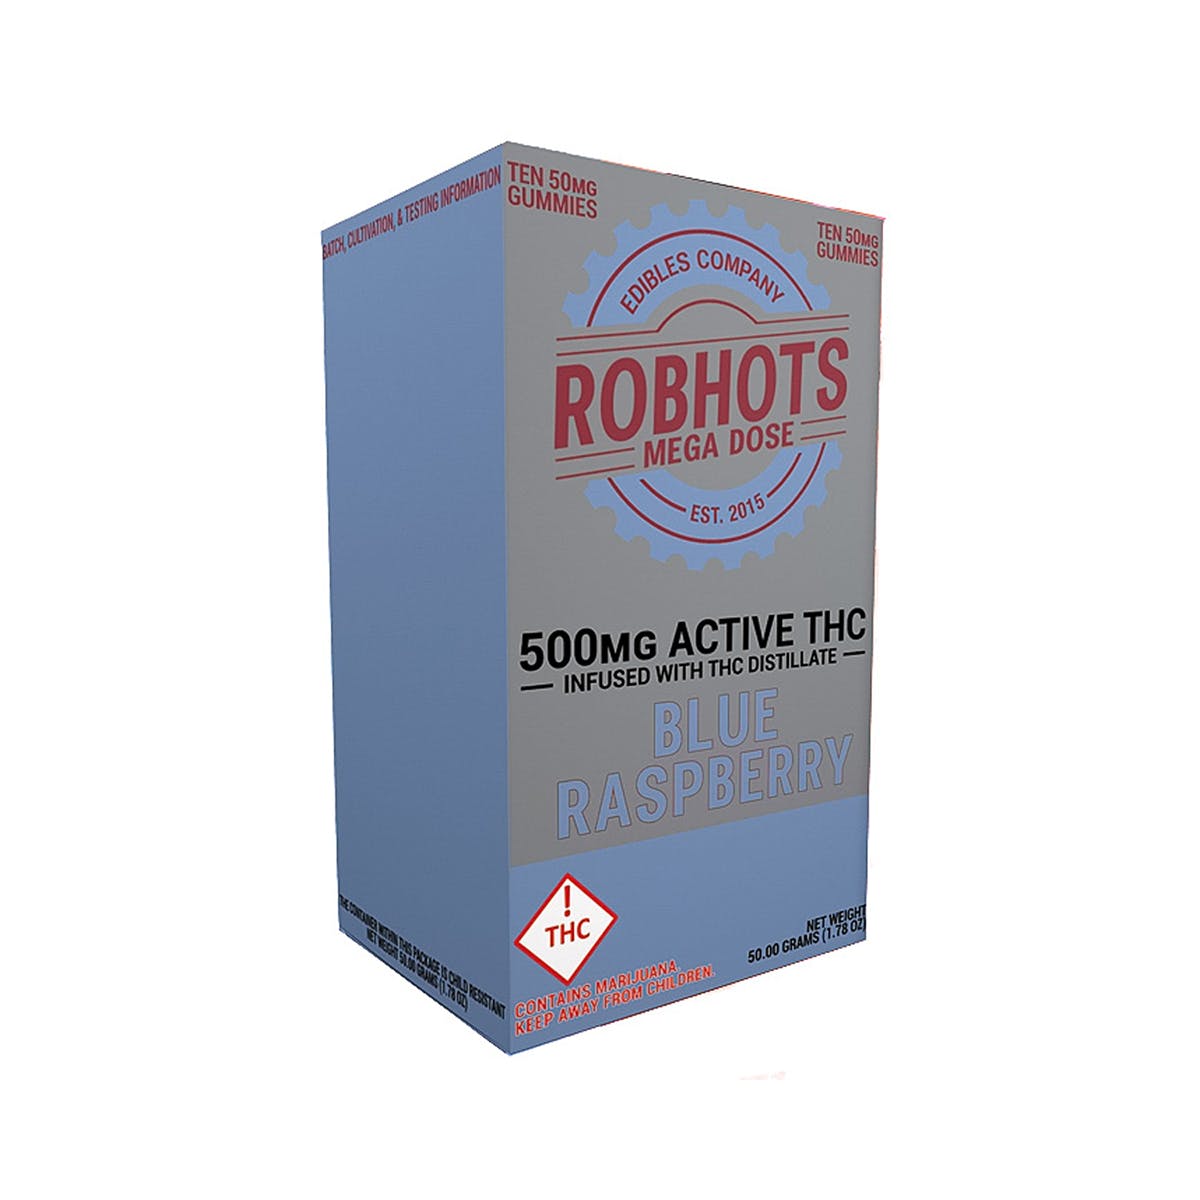 marijuana-dispensaries-the-chronic-boutique-pikes-peak-in-colorado-springs-blue-raspberry-500mg-robhots-gummy-multipack